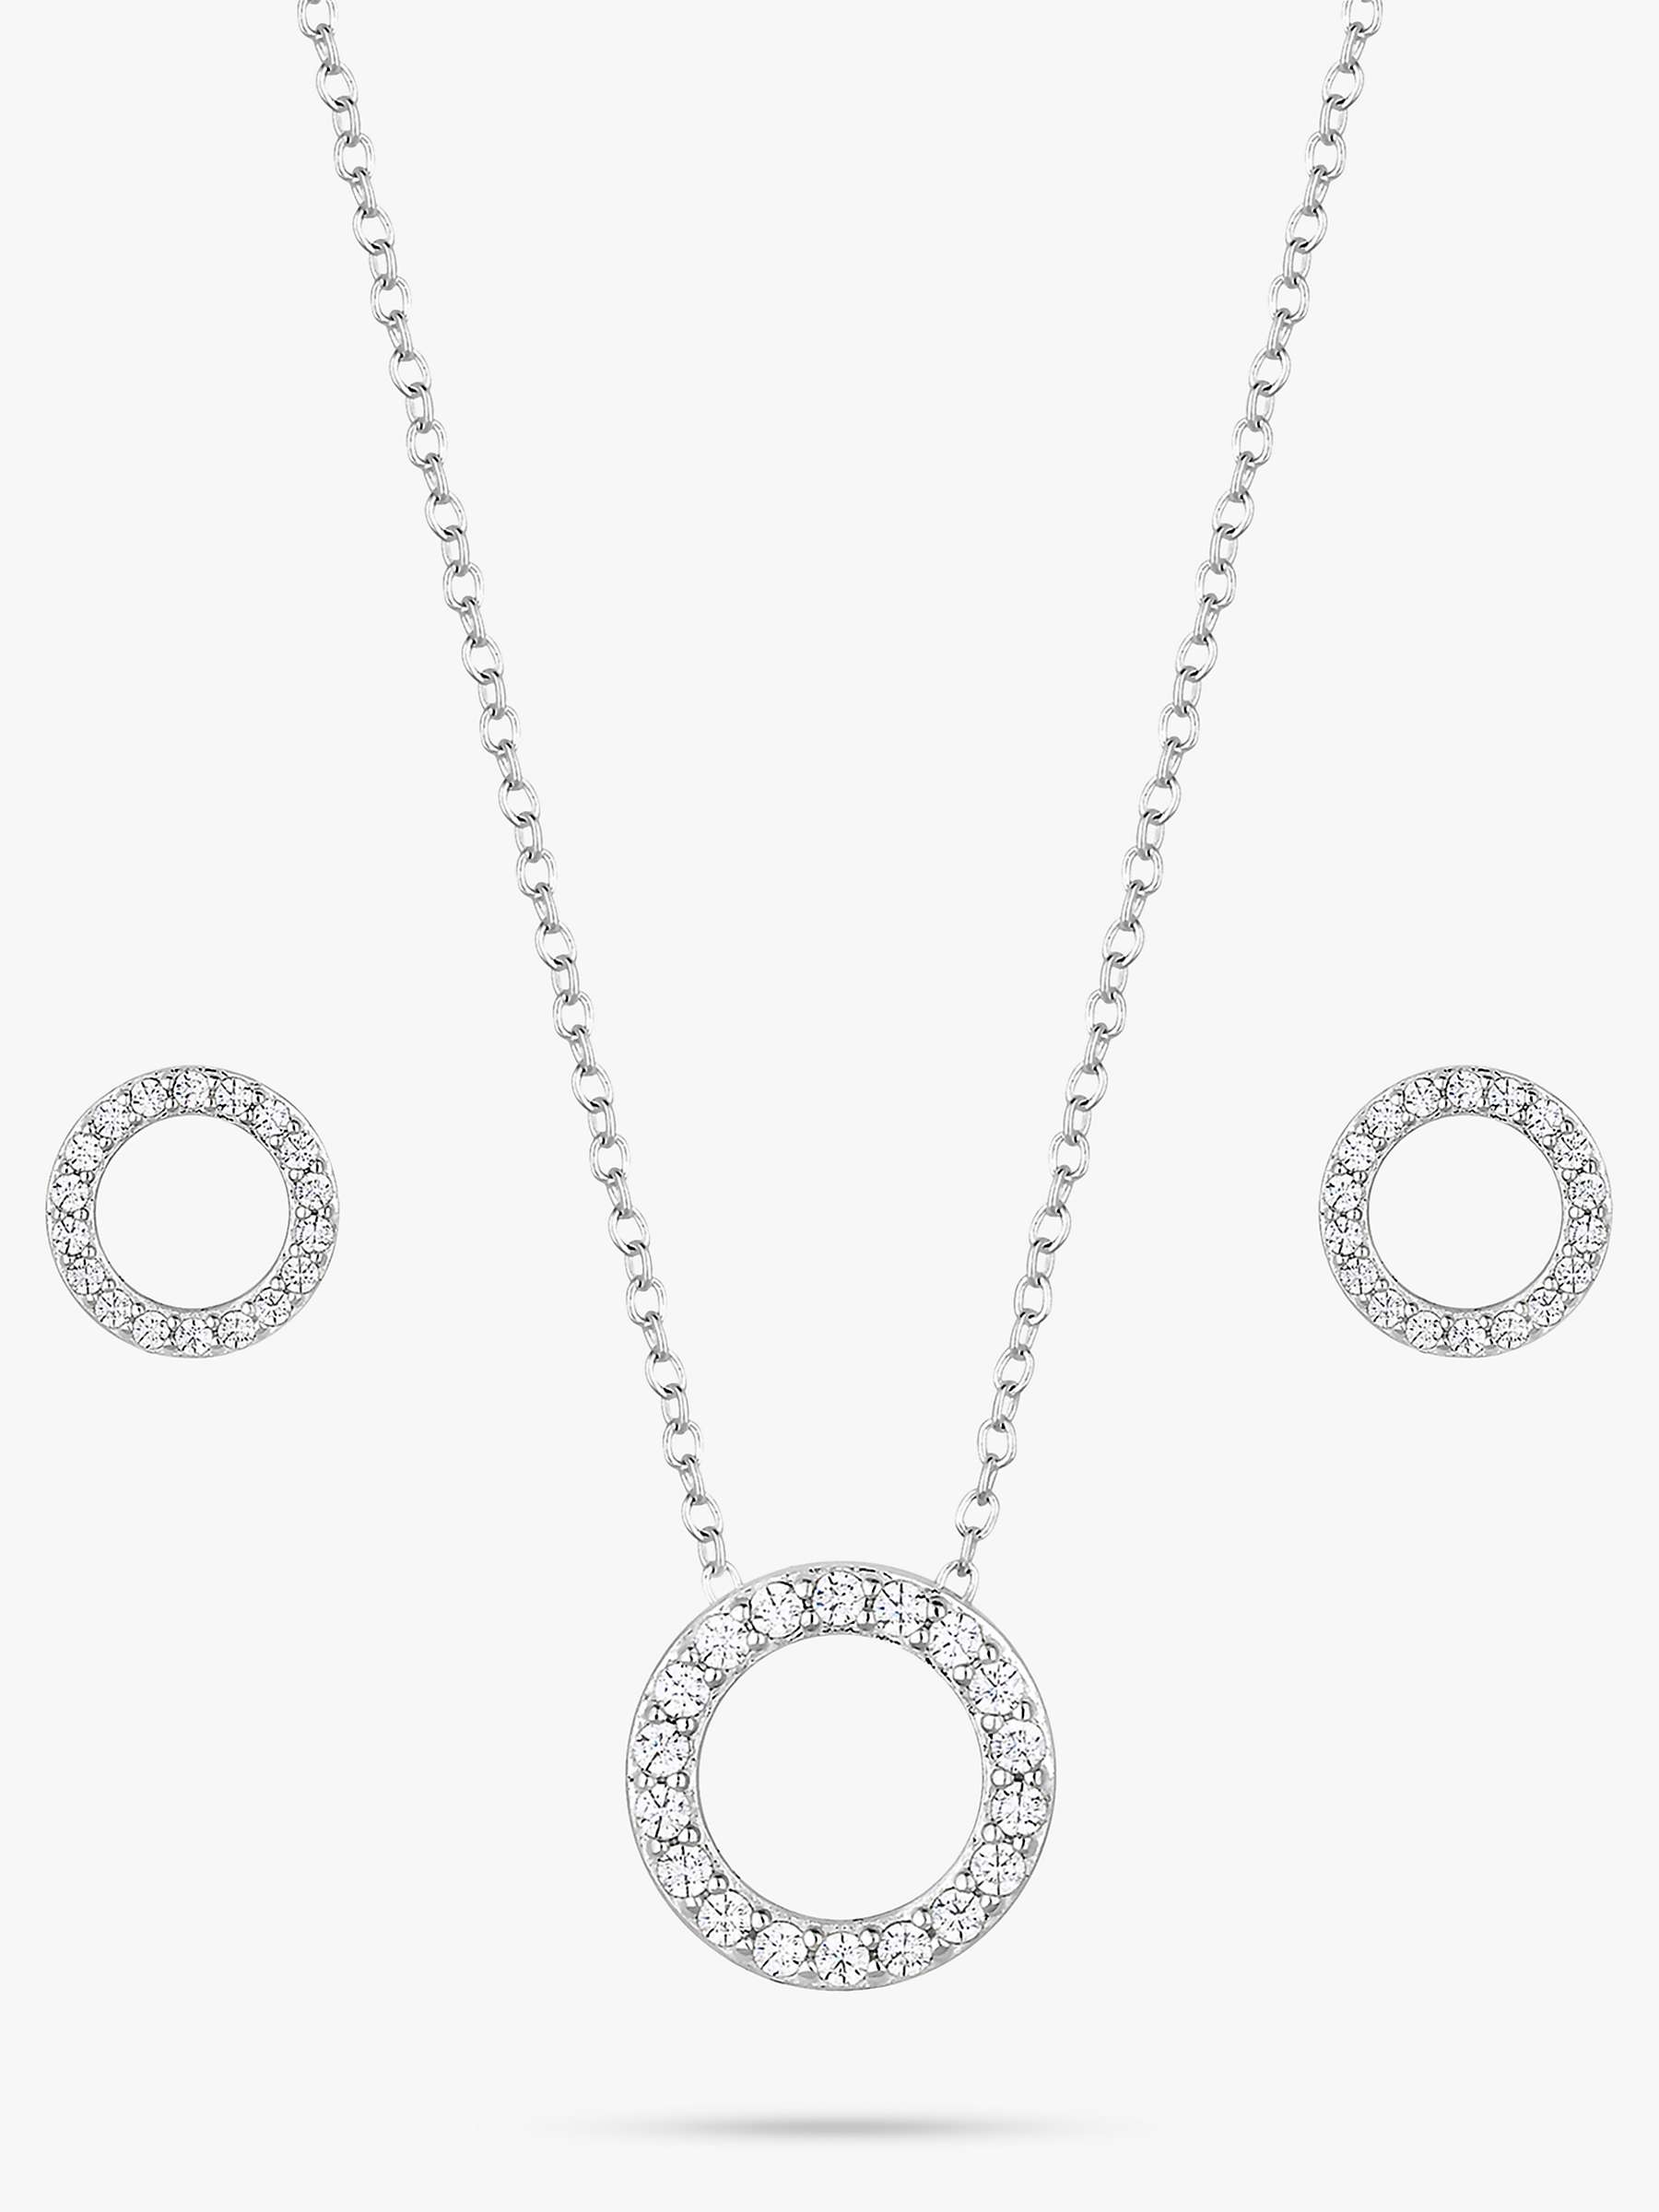 Buy Simply Silver Circle Cubic Zirconia Stud Earrings and Pendant Necklace Jewellery Set, Silver Online at johnlewis.com